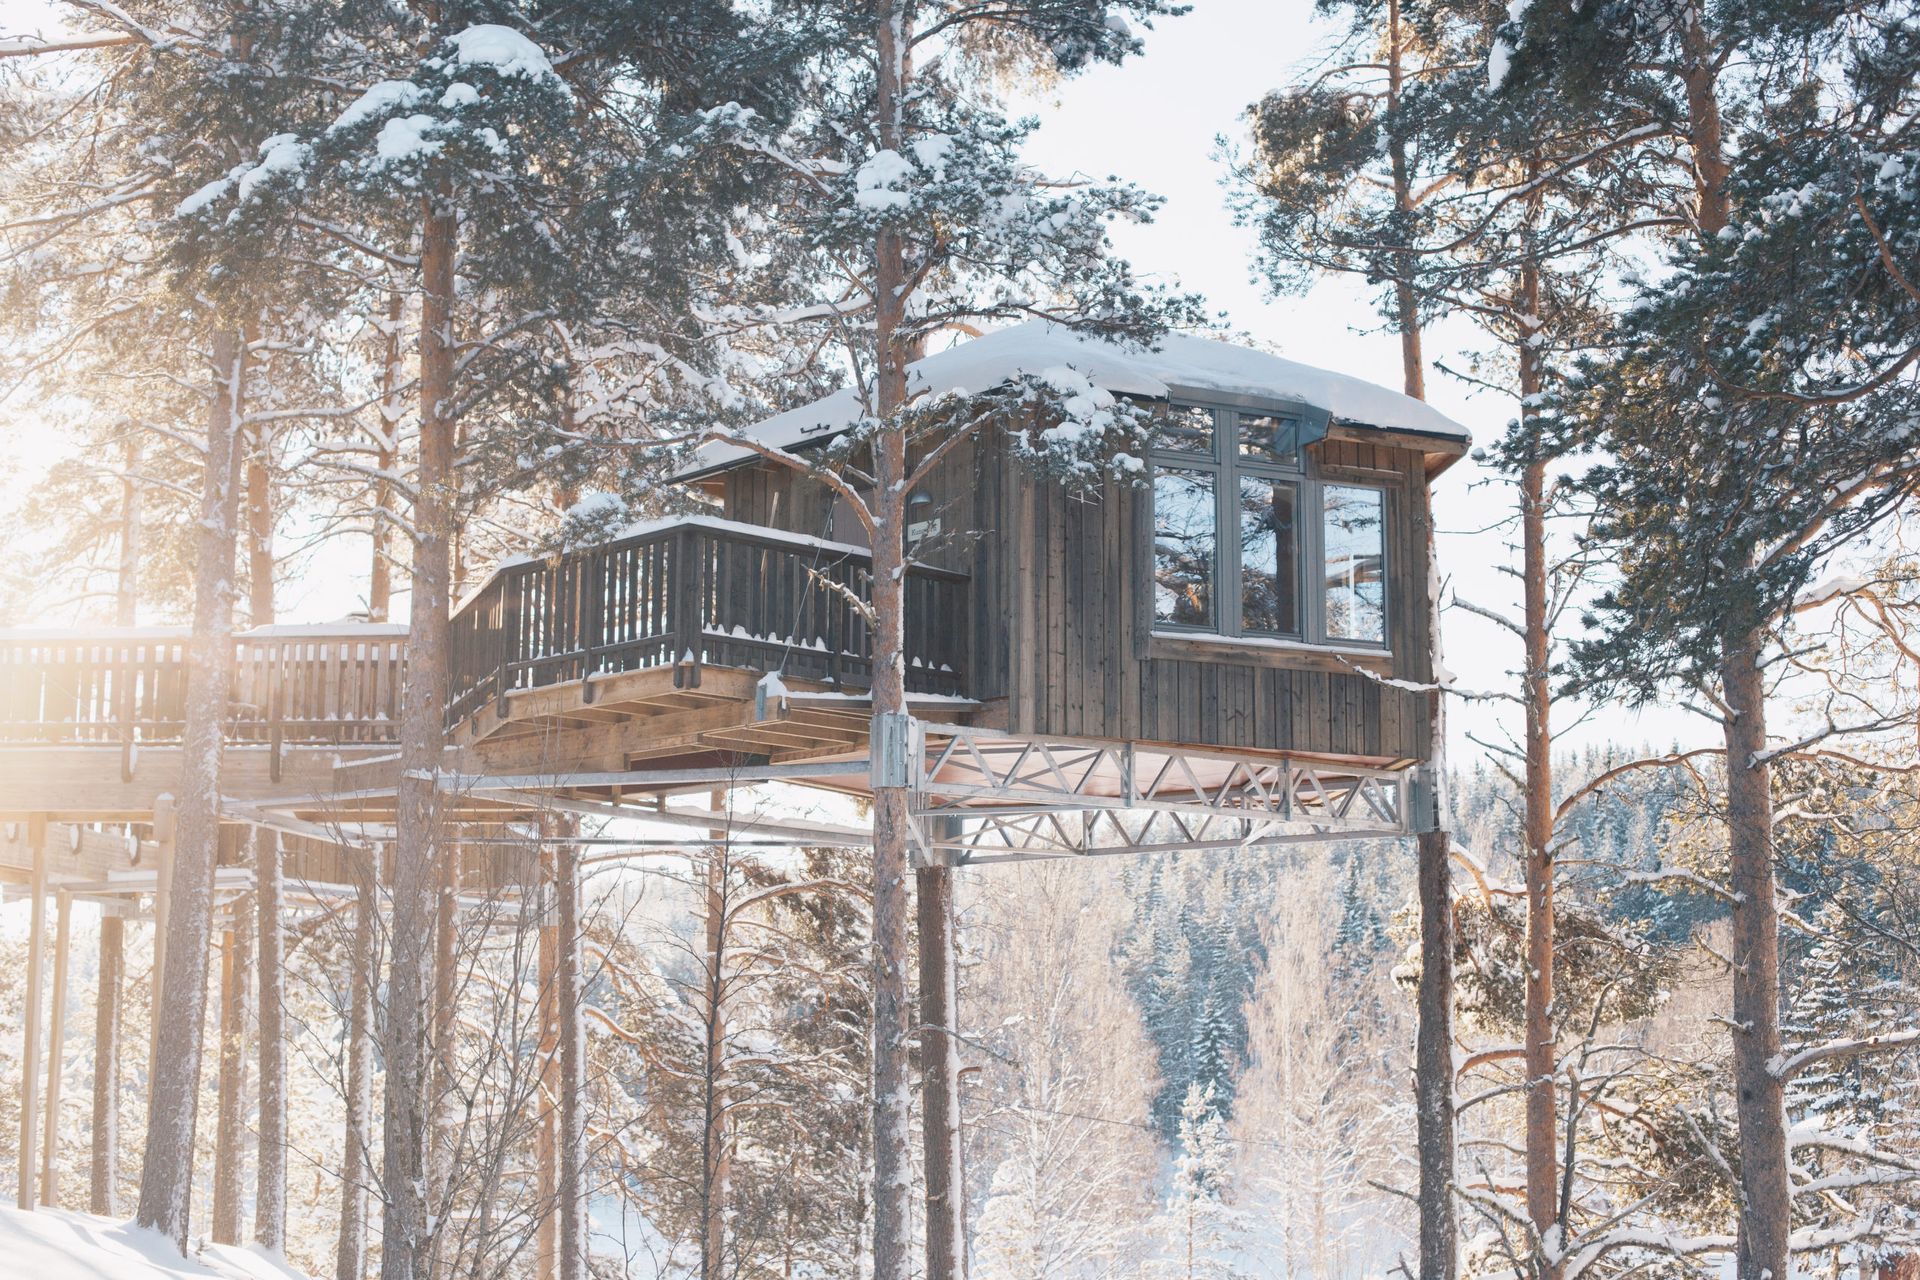 Wooden treehouse structure elevated in a snowy forrest.